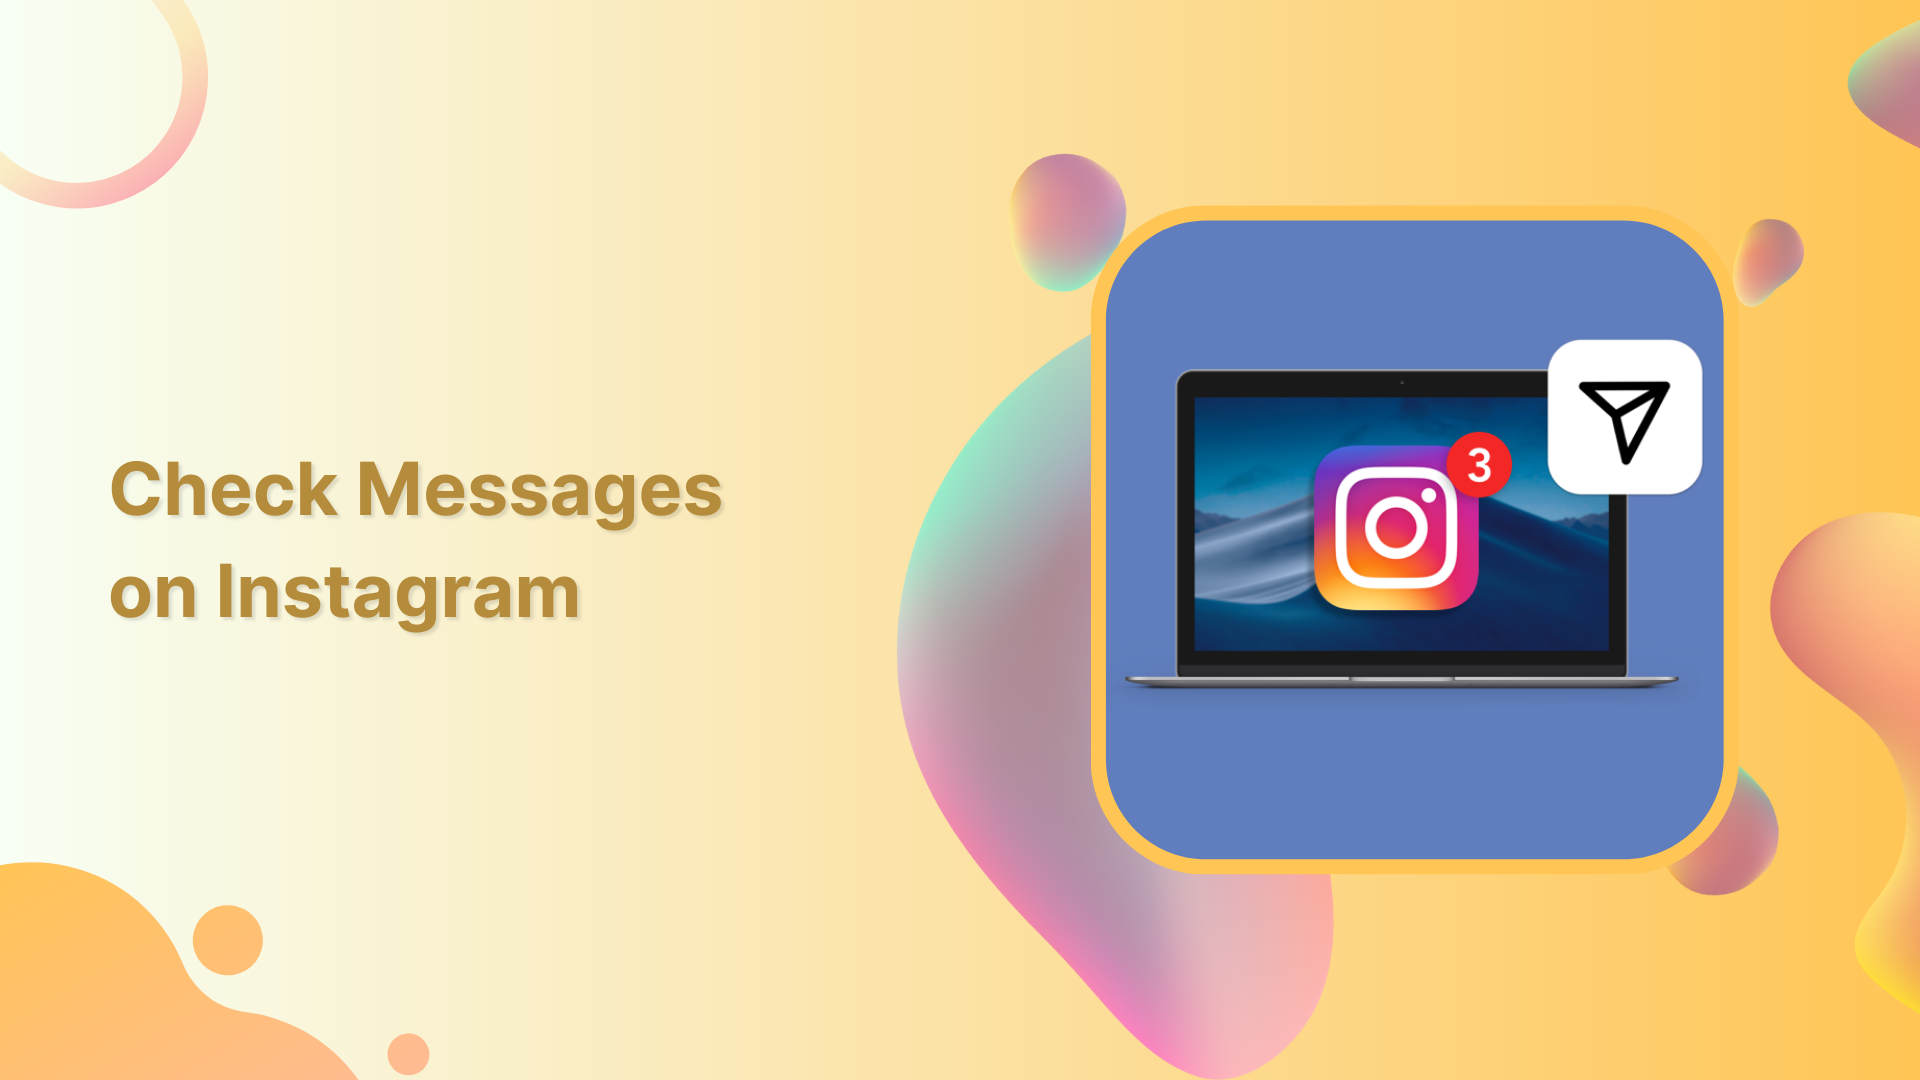 Check messages on Instagram